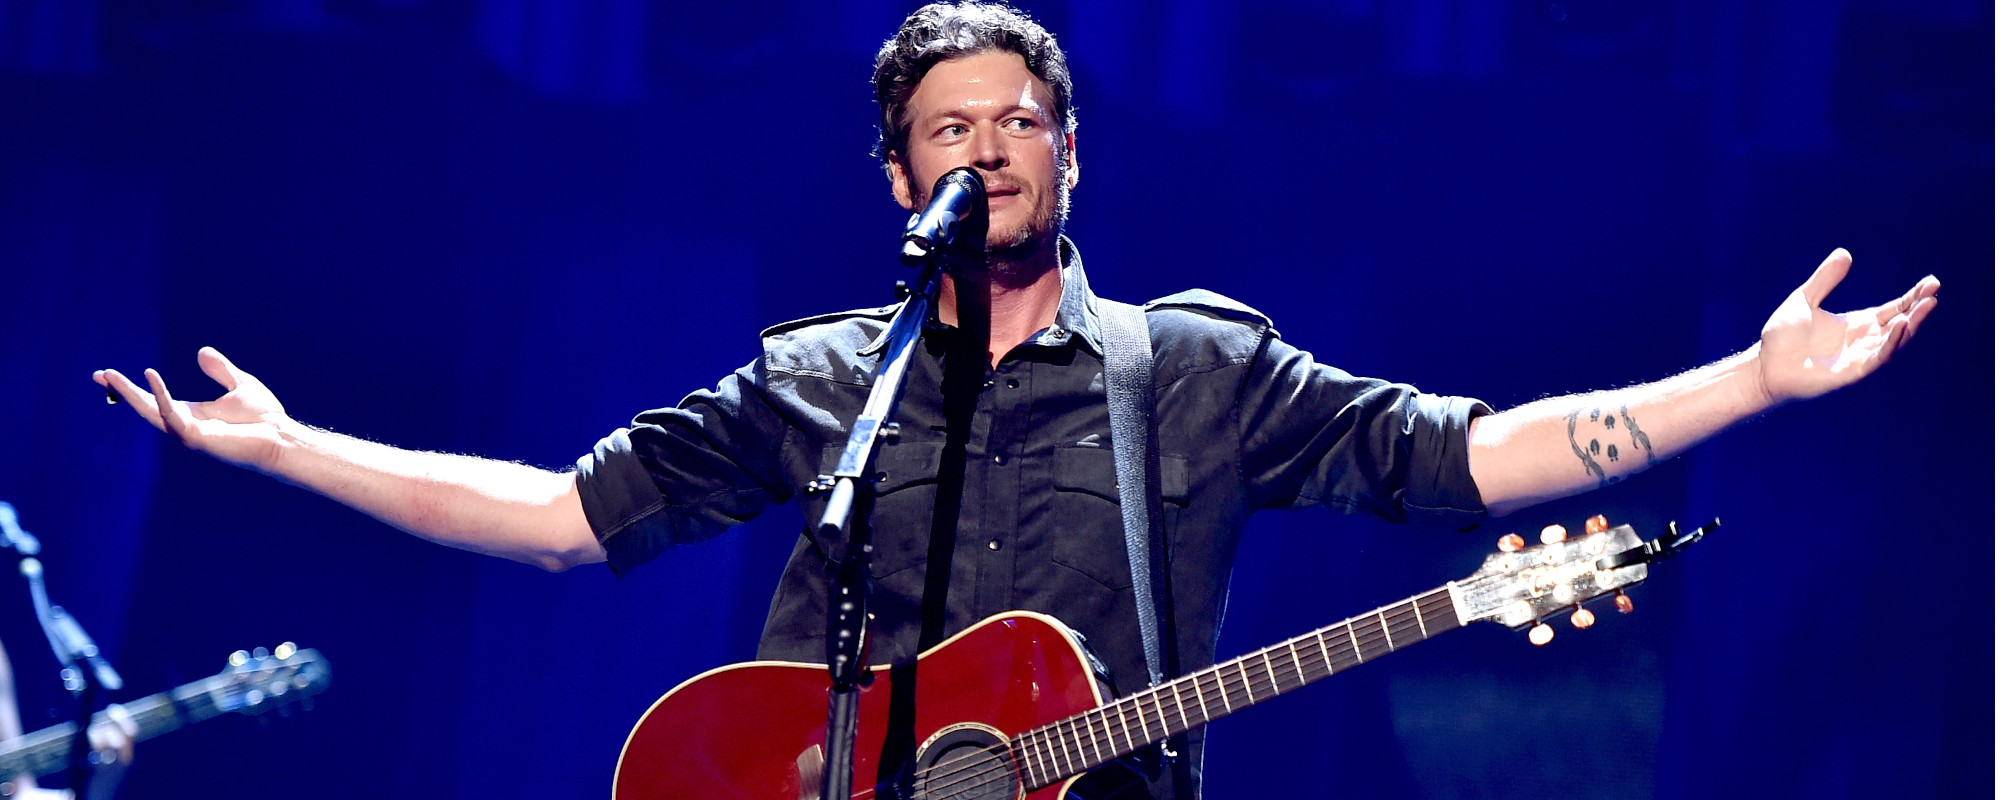 Remember When: Blake Shelton Knocked Out a Duet of Dolly Parton and Kenny Rogers’ “Islands in the Stream” on ‘The Voice’